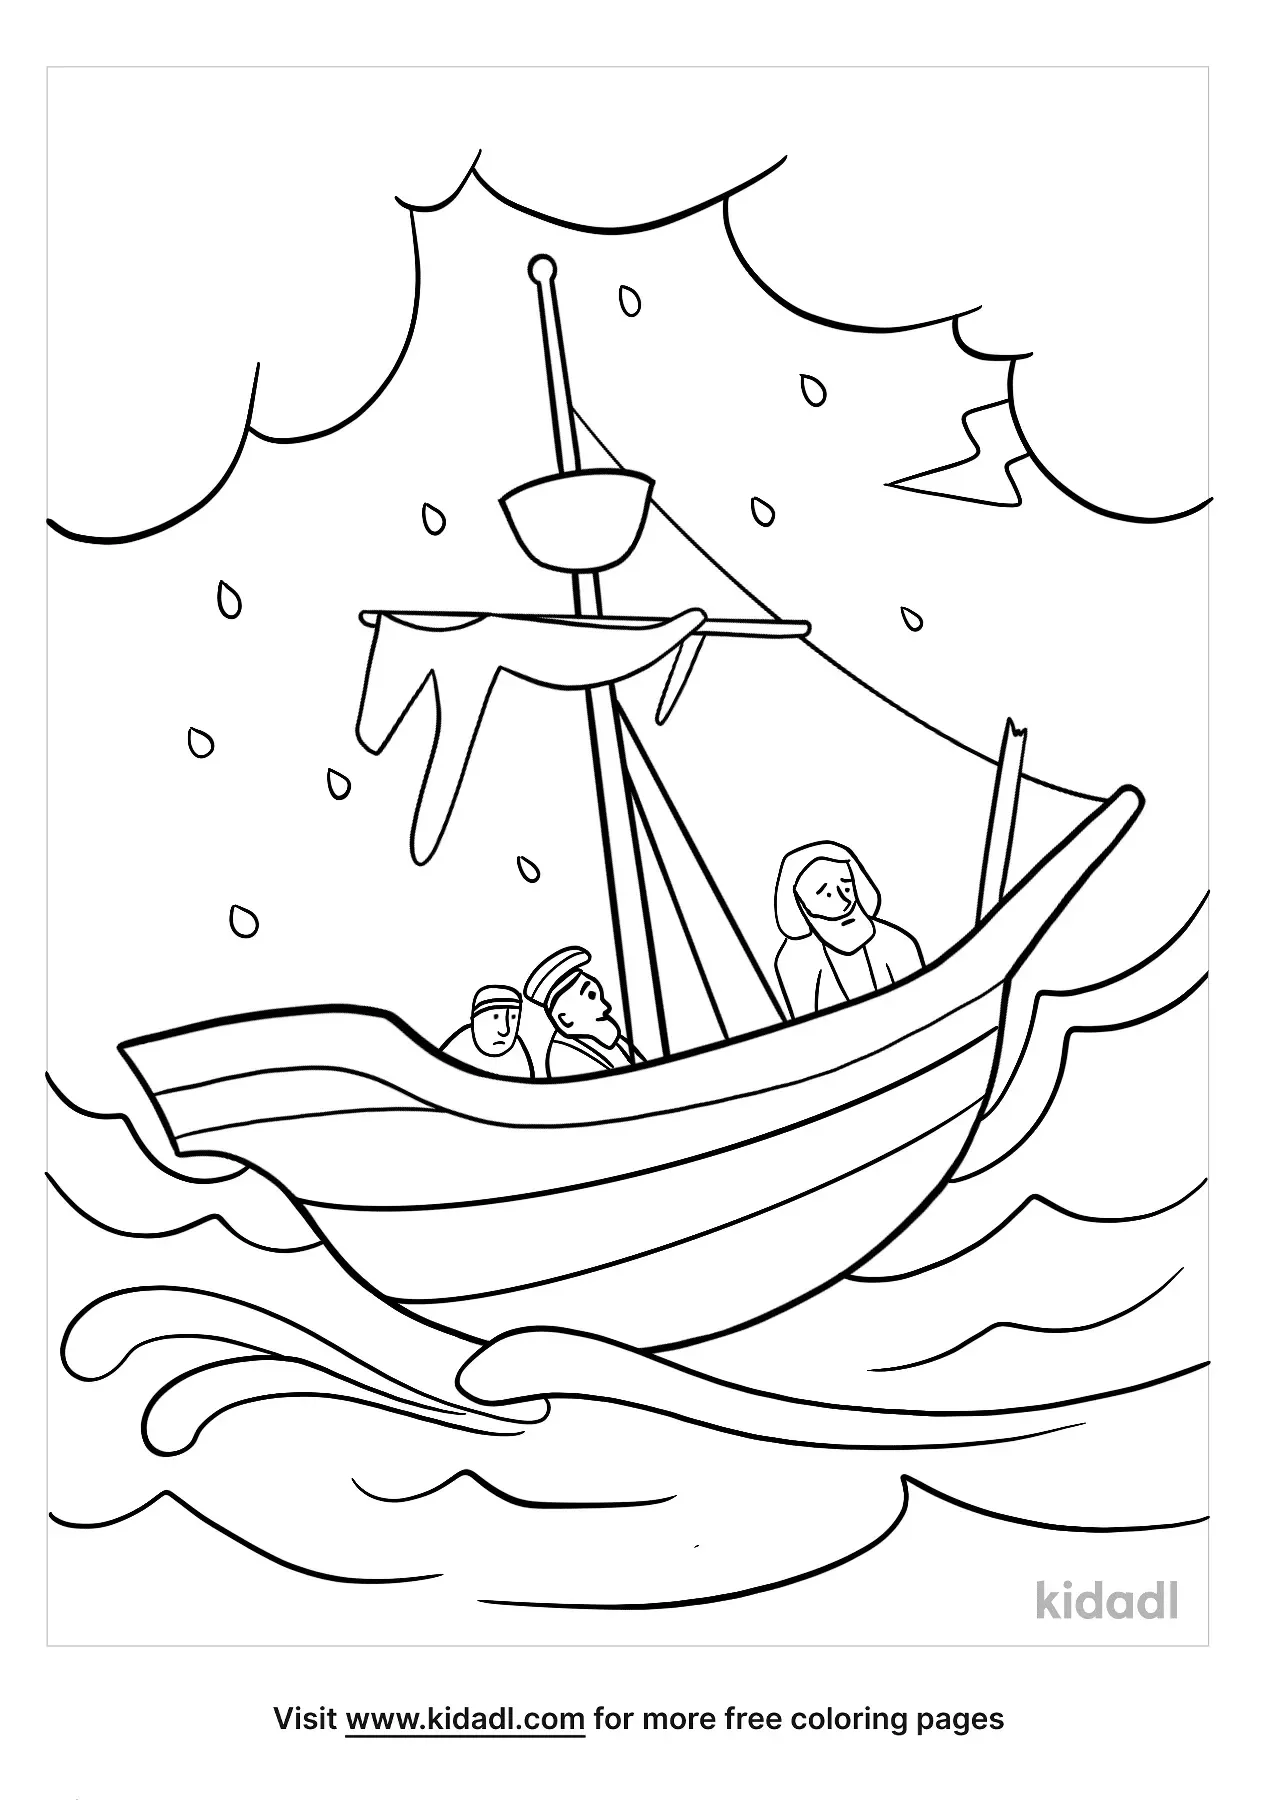 24+ Shipwrecked Coloring Pages | UthpalaHolliana